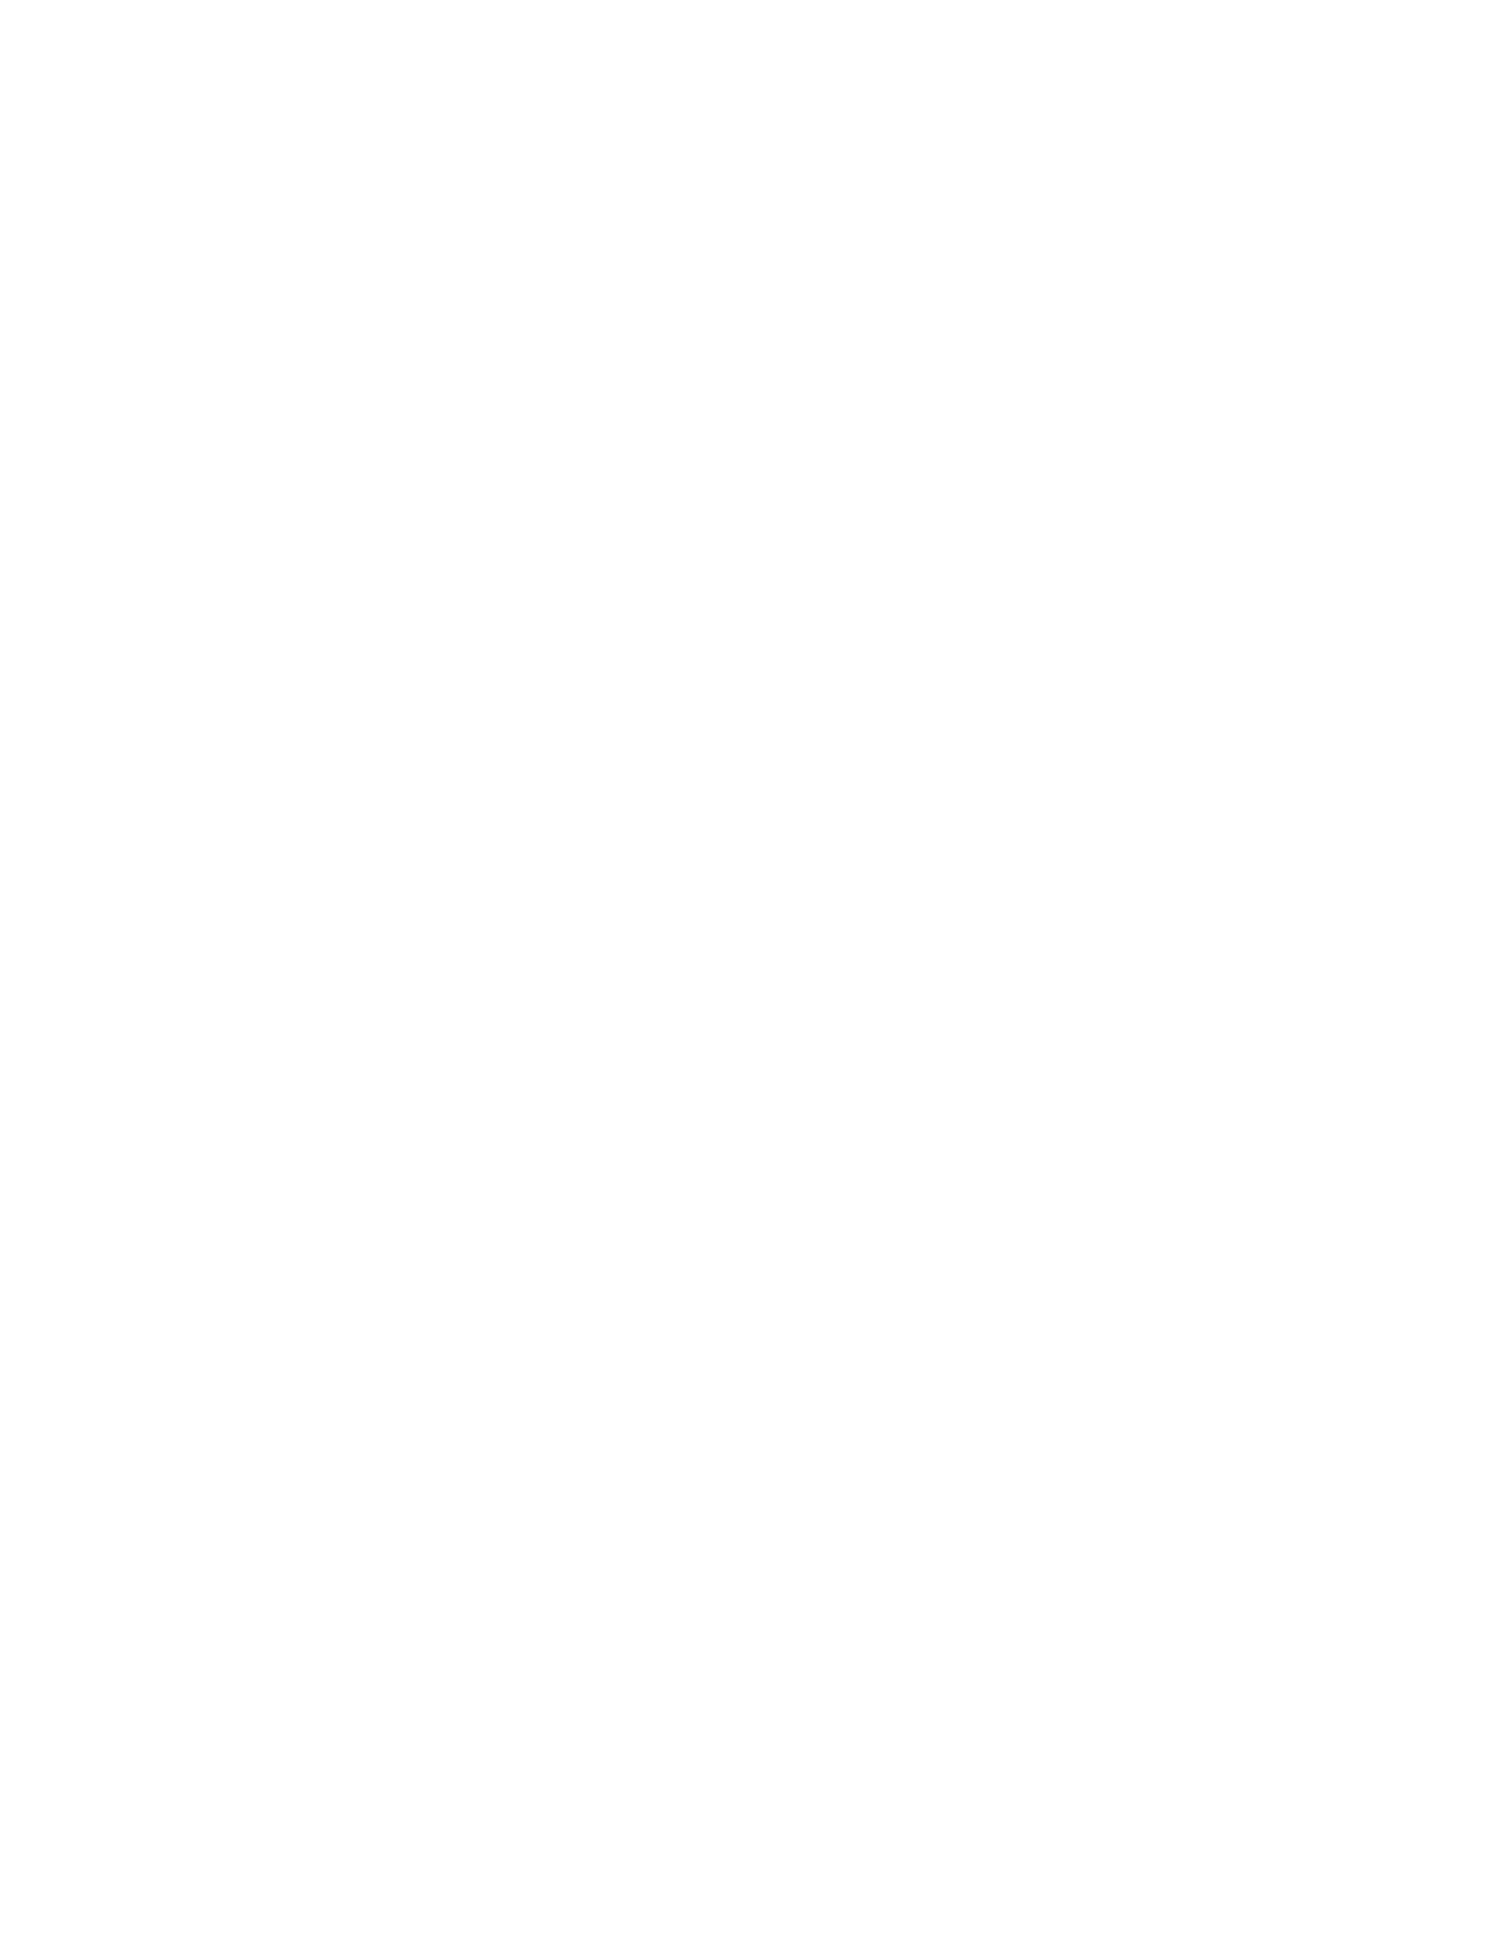 Anderson Road Runners Club